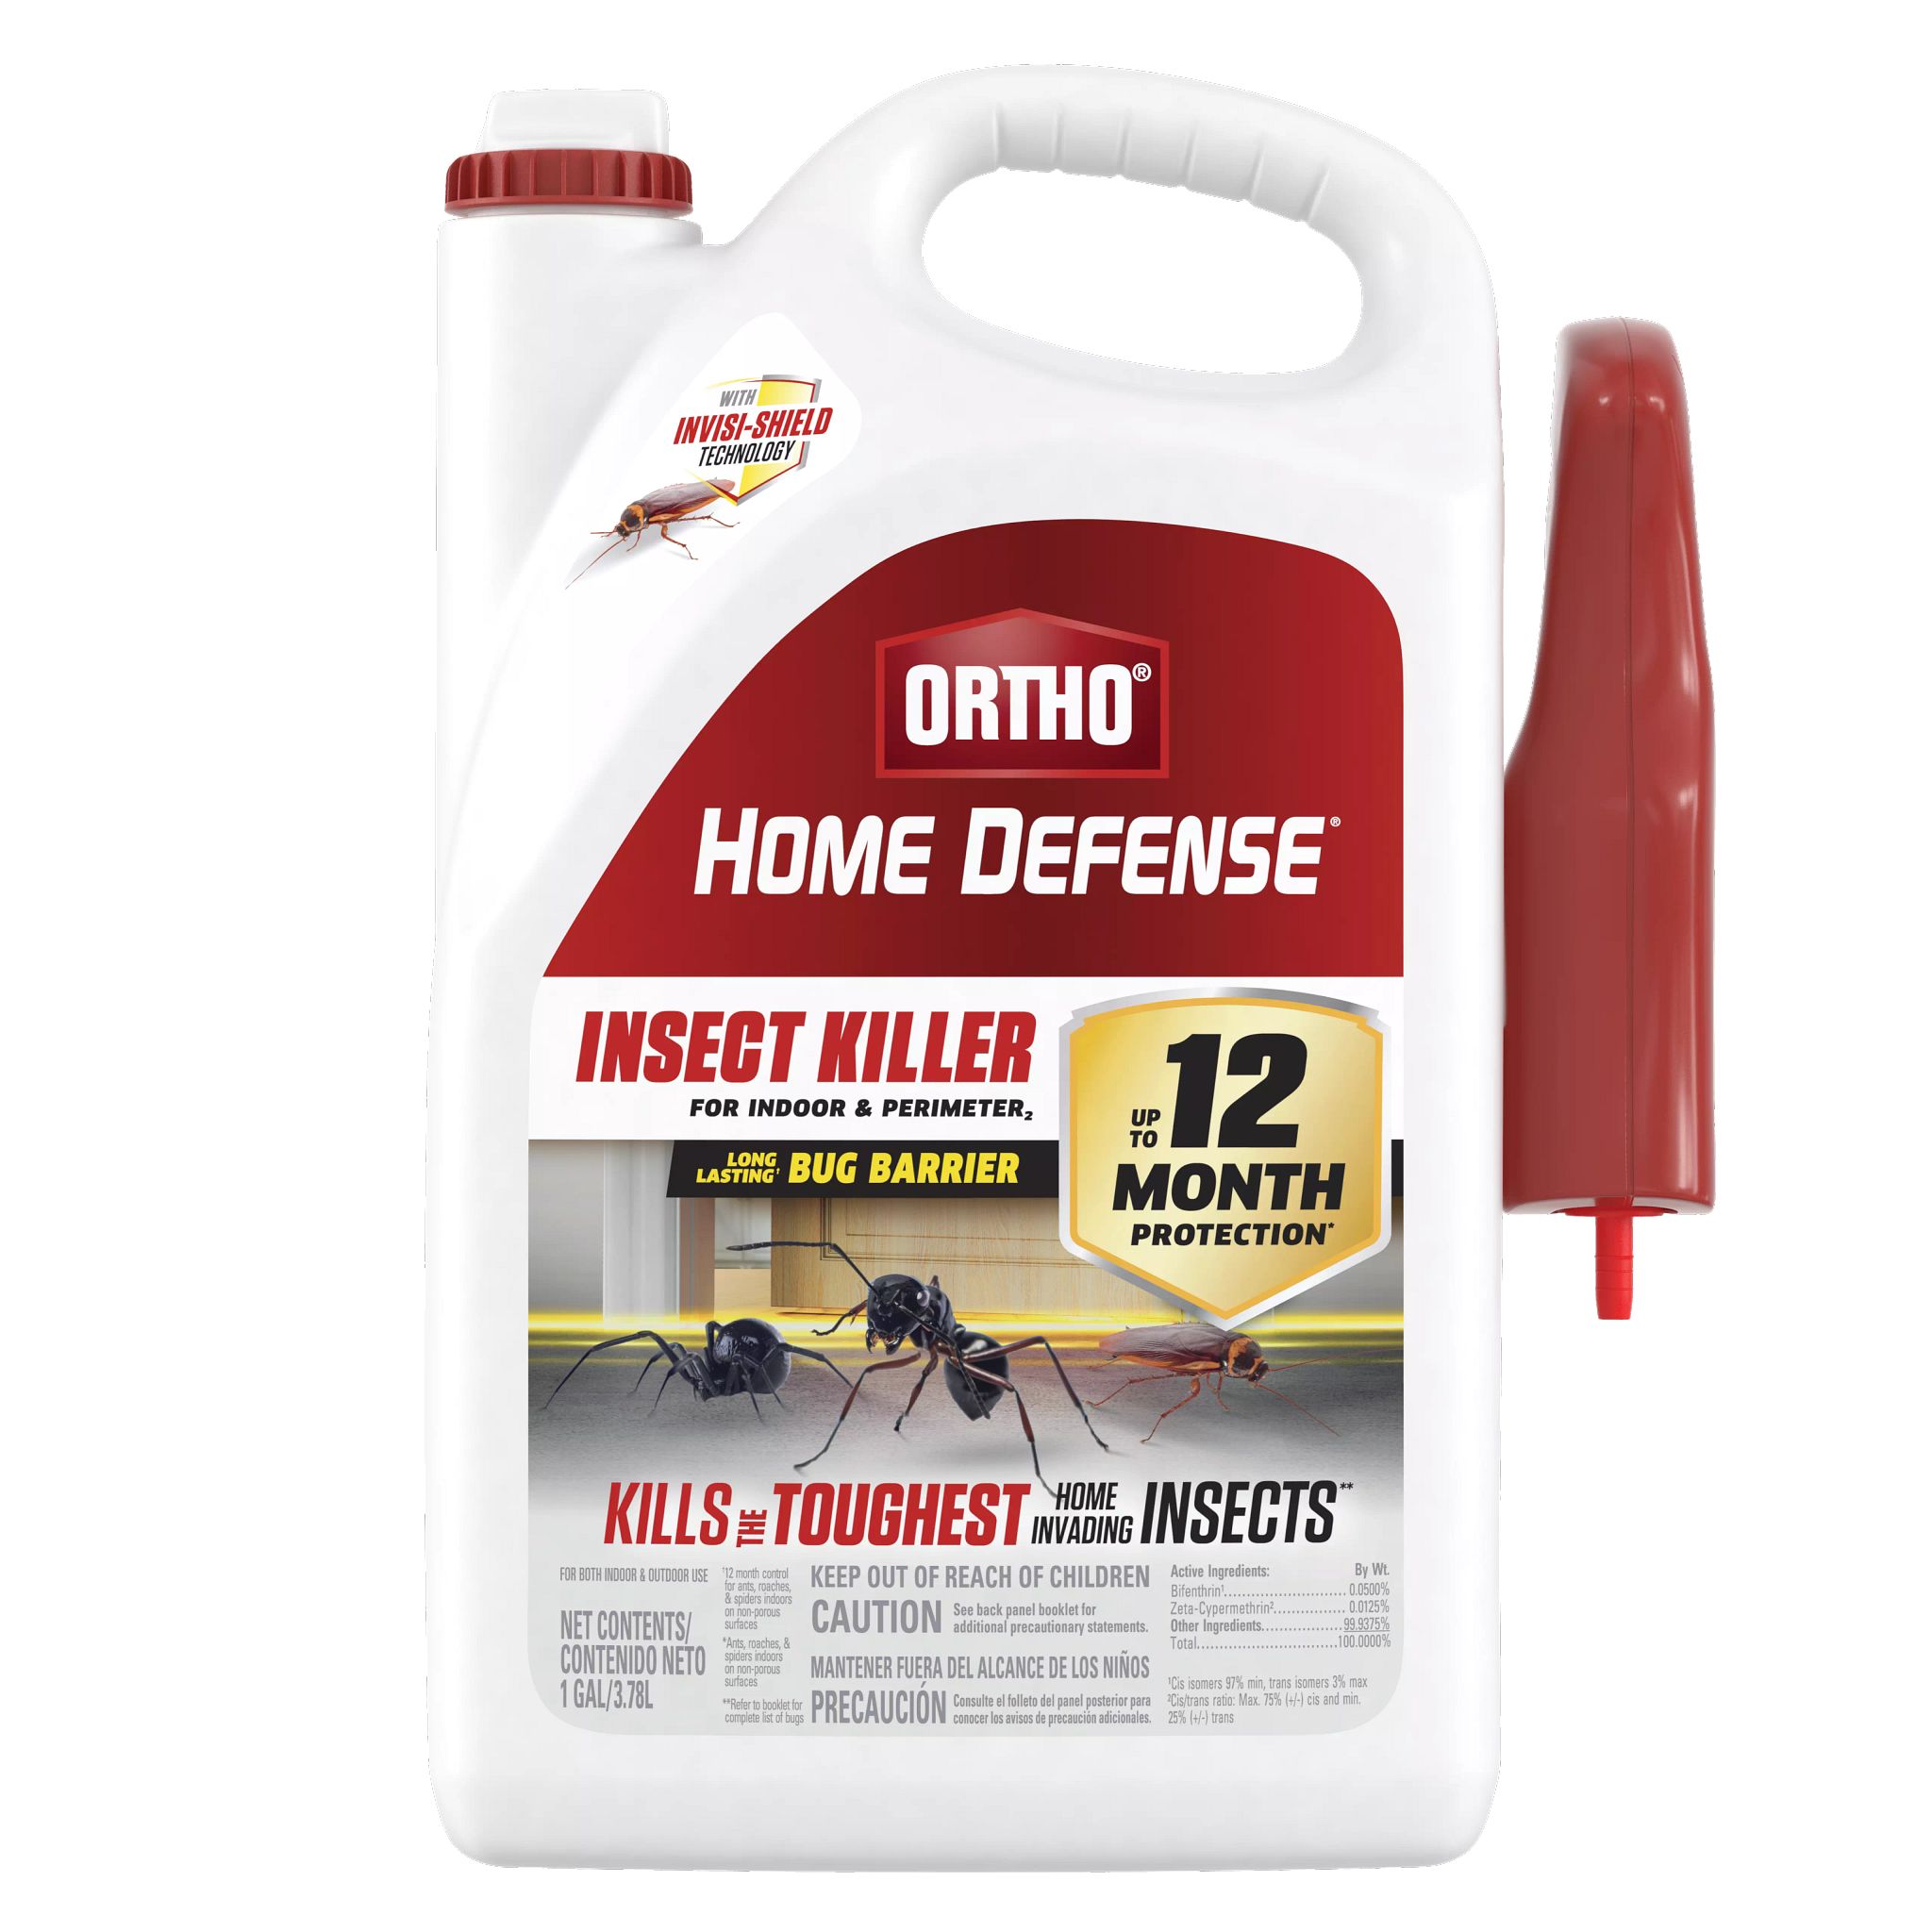 Ortho Home Defense Insect Killer for Indoor & Perimeter2, Controls Ants, Roaches, and More, 1 gal. - image 1 of 5